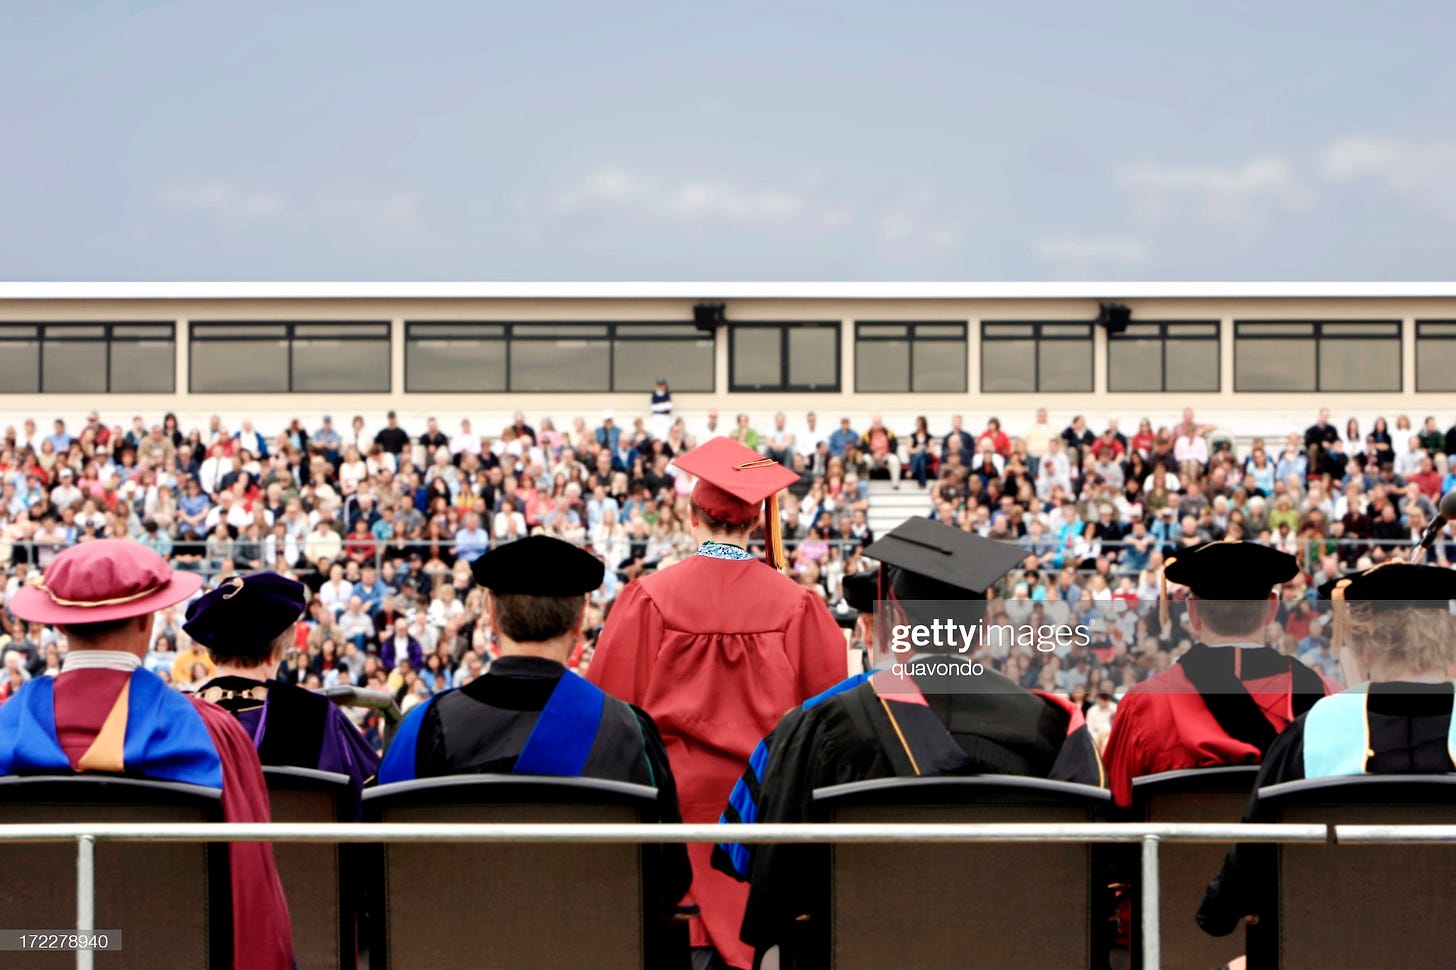 Back of College Graduation Ceremony with Crowd, Copy Space : Stock Photo